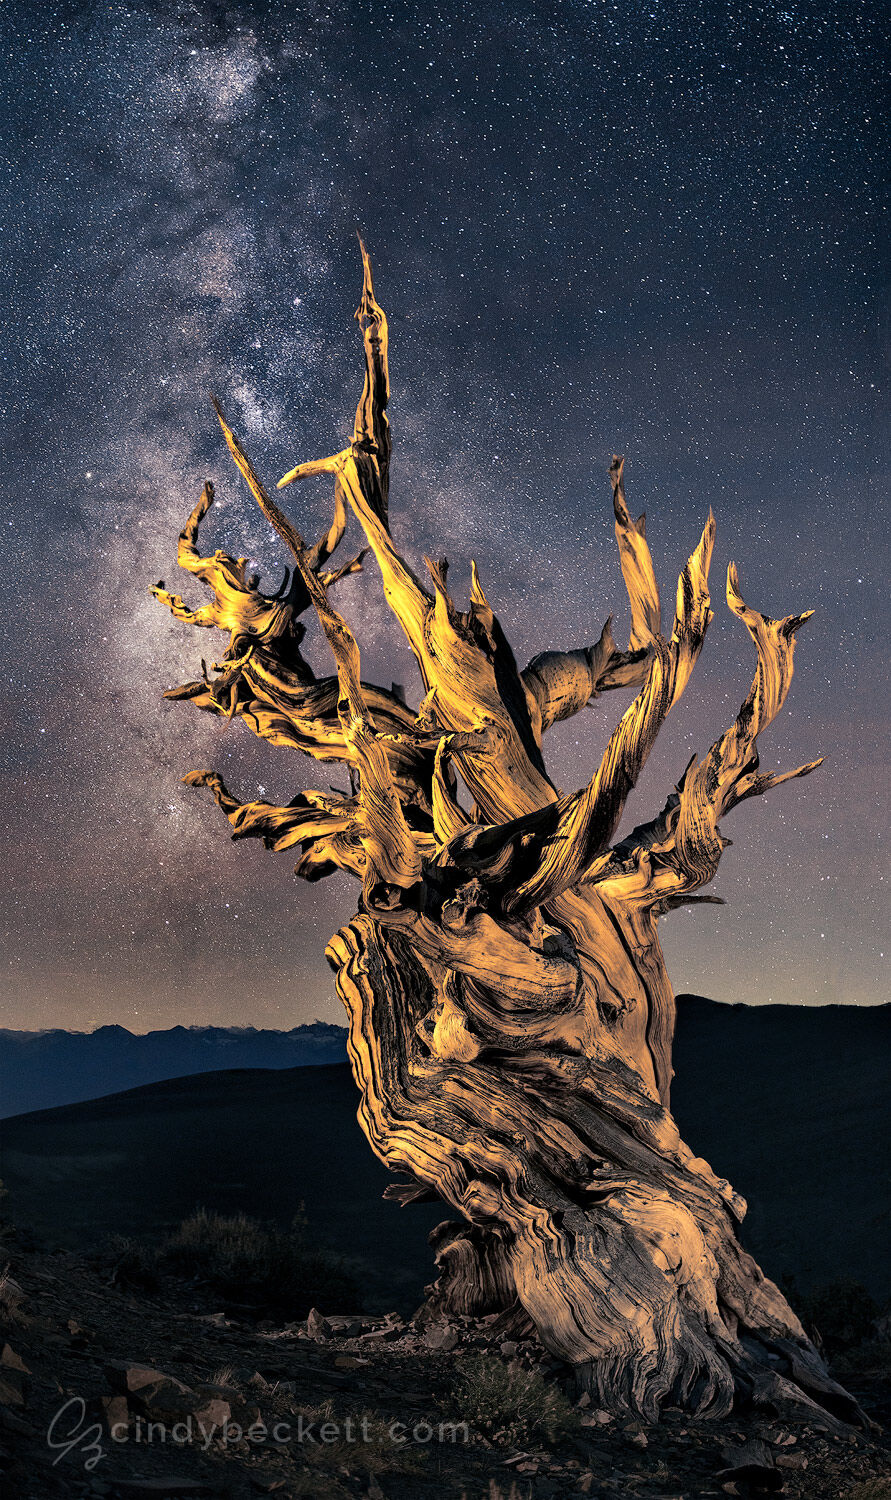 An ancient bristlecone pine reaches towards the stars in this night image taken in the high elevations of the White Mountains where these magnificent trees live